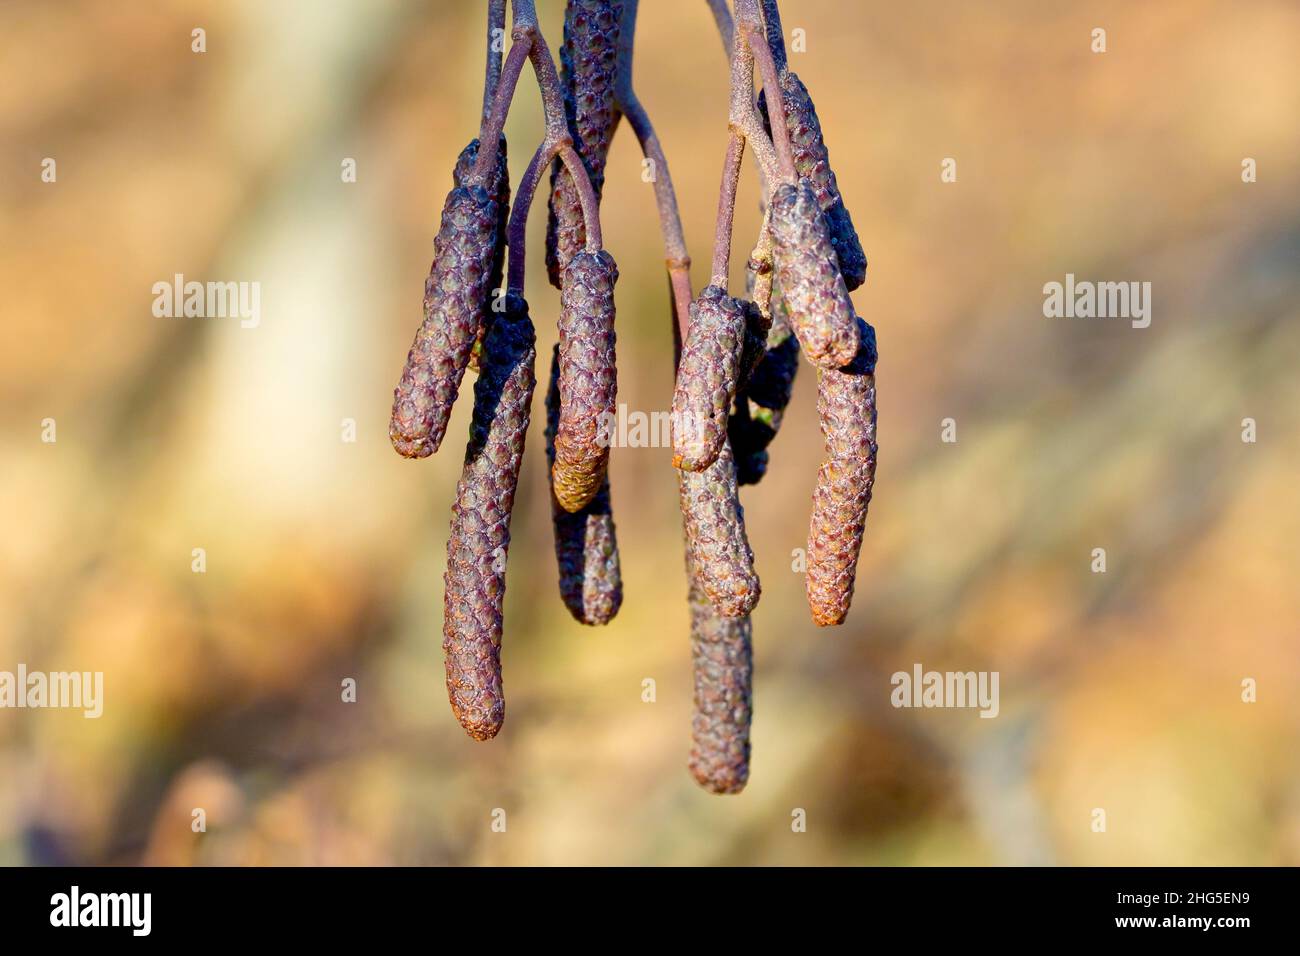 Alder (alnus glutinosa), close up of the male catkins, still closed, produced at the end of the year in preparation for the following spring. Stock Photo